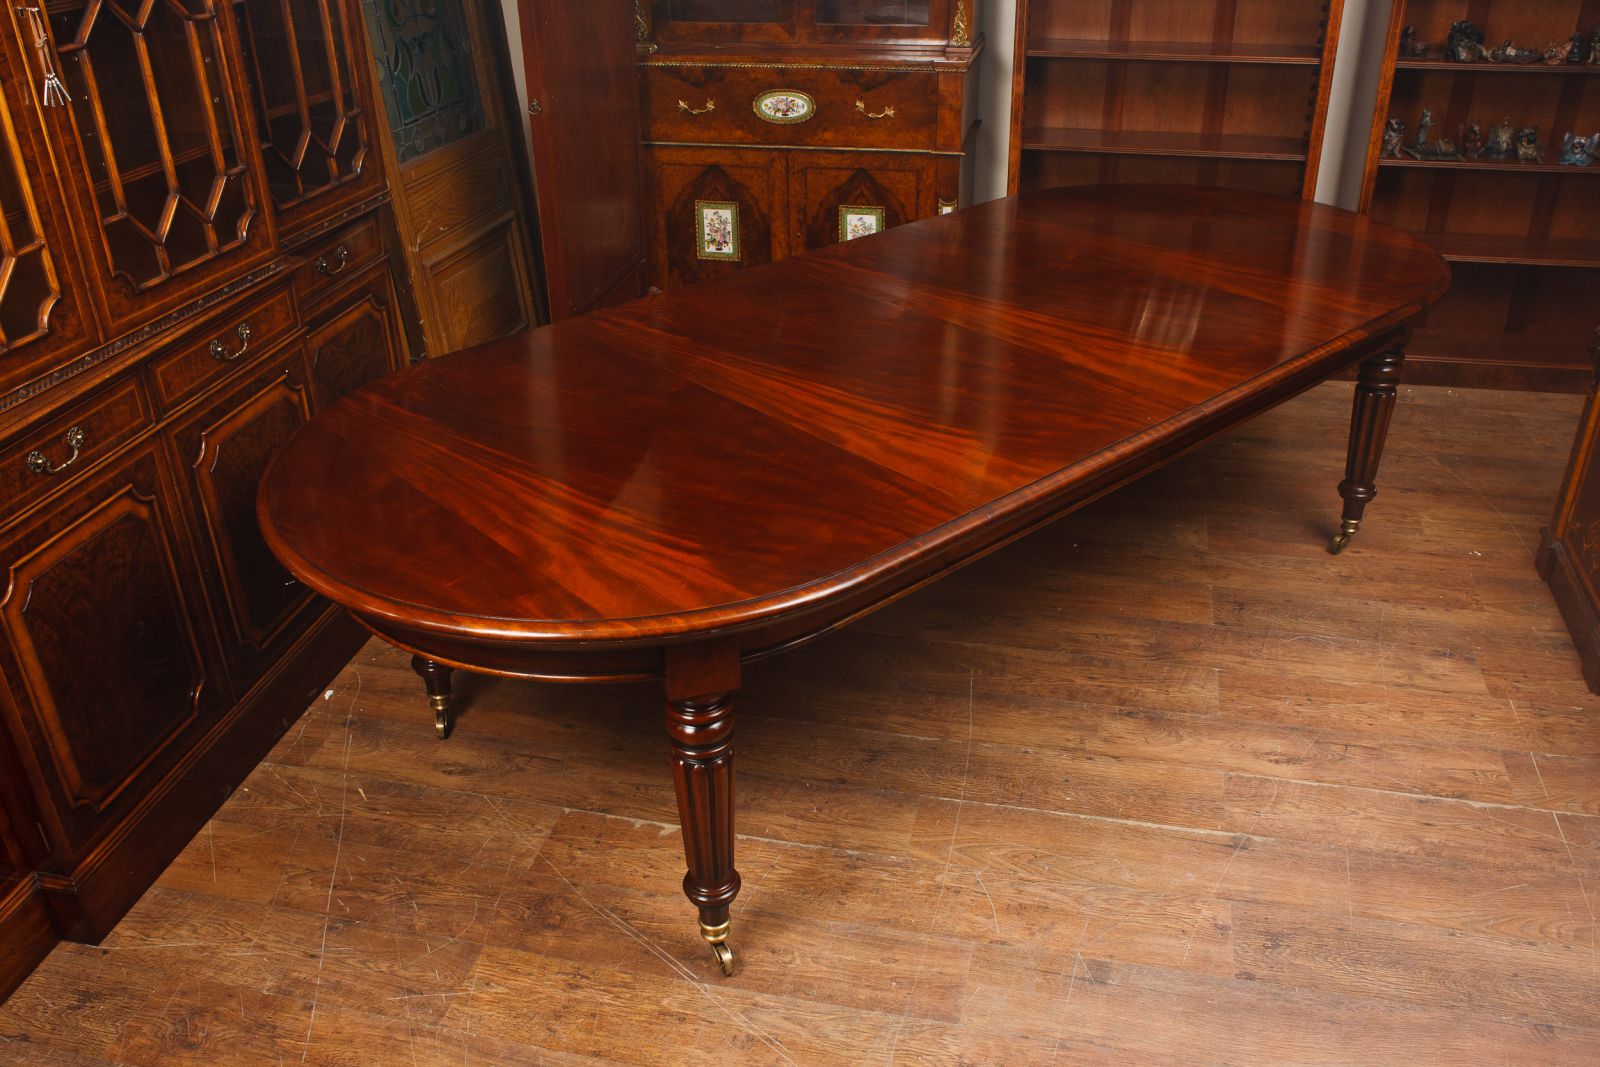 Just look at the patina to the wood on this Victorian mahogany dining table